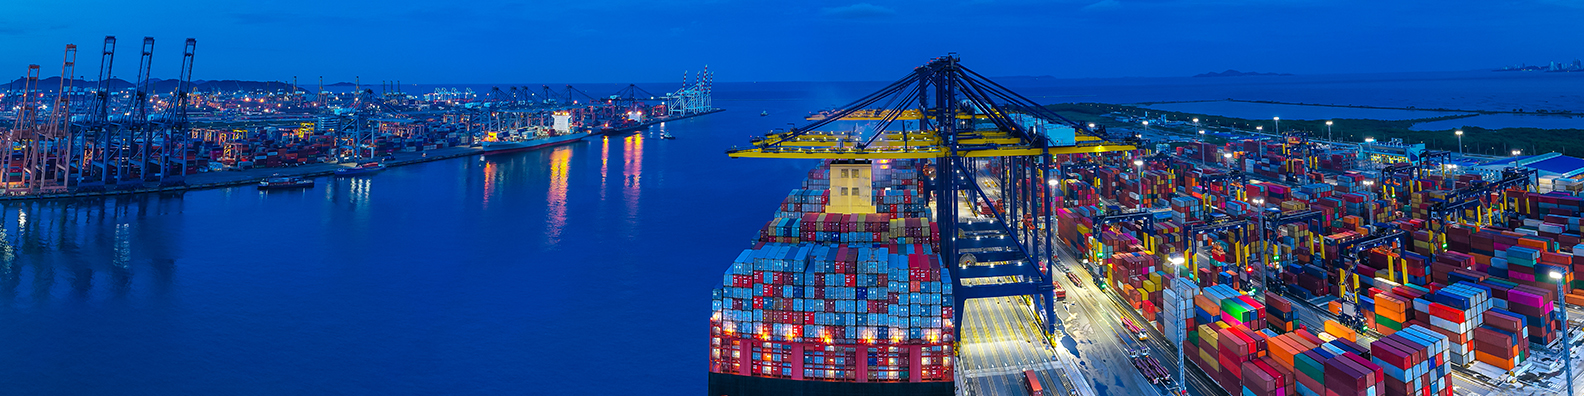 Image of cargo containers, and a ship with containers sitting in water. 